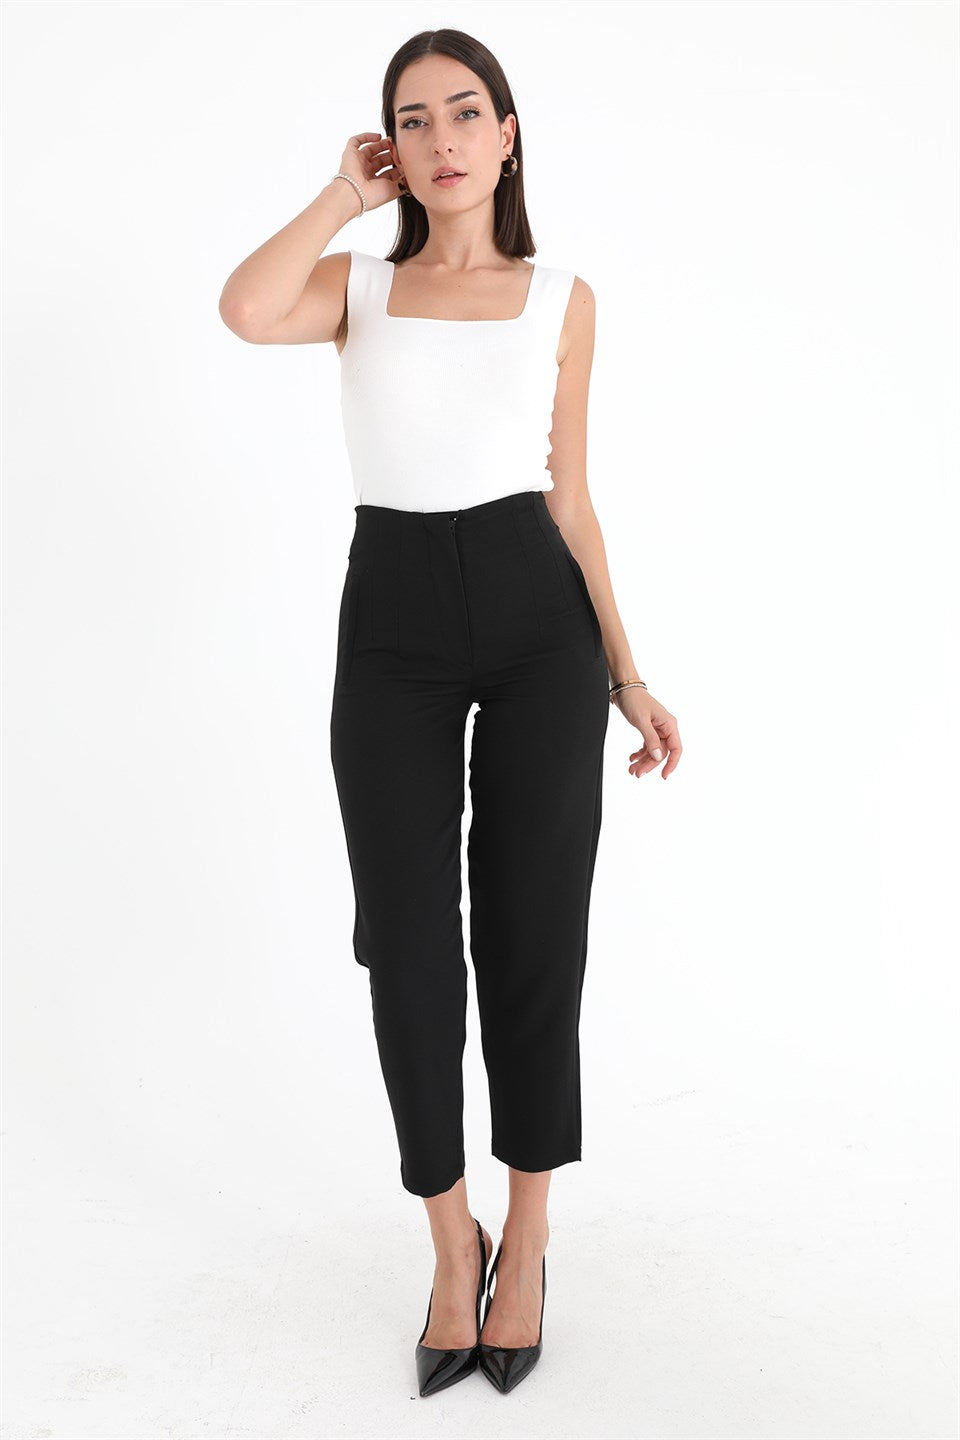 Women's High Waist Stretched Atlas Fabric Trousers - Black - STREETMODE™